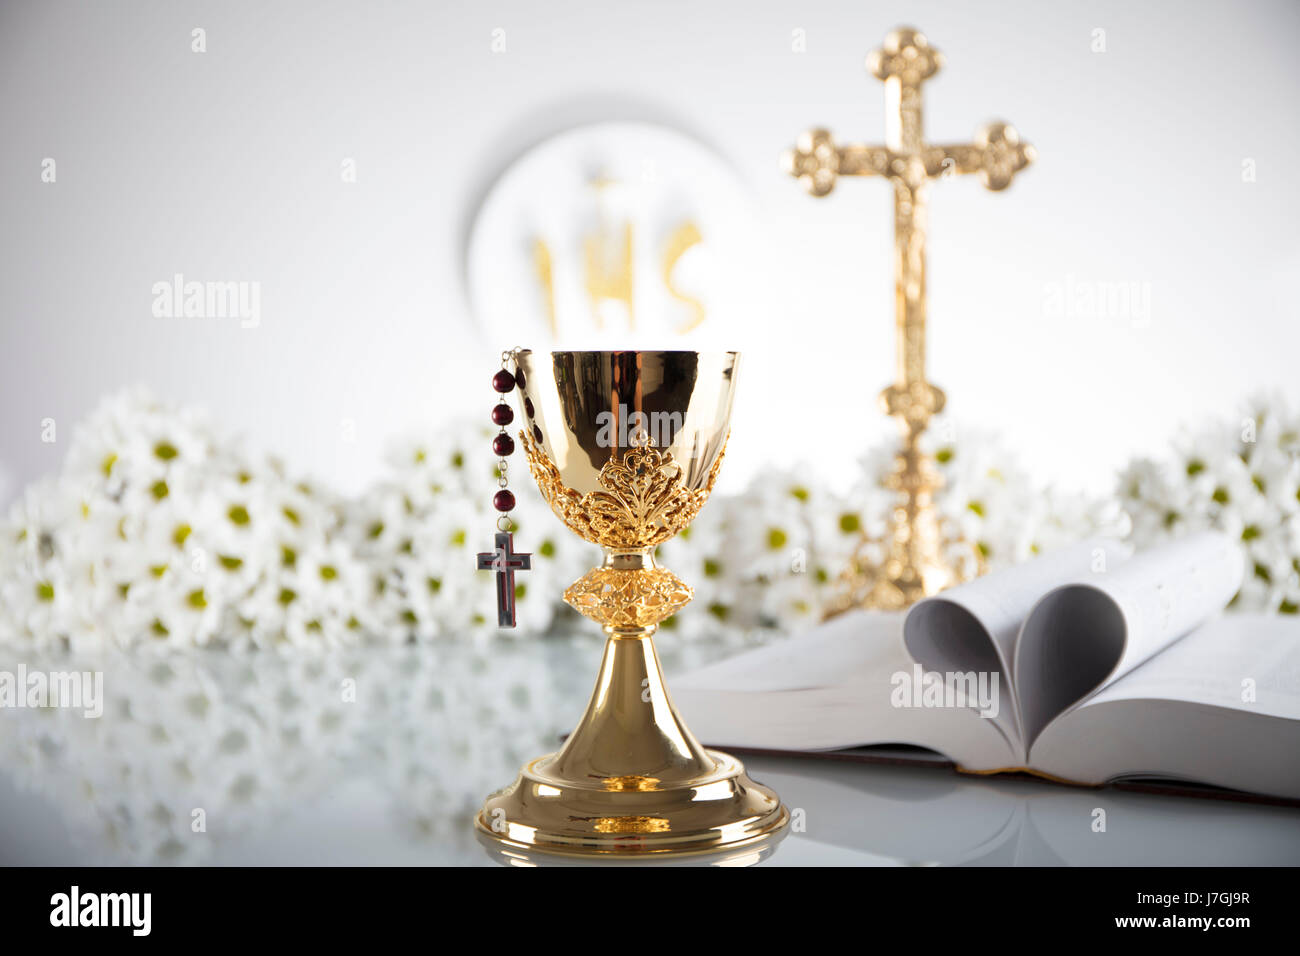 First Holy Communion. Catholic religion theme. Crucifix, Bible, bread isolated on white table and white background. Stock Photo